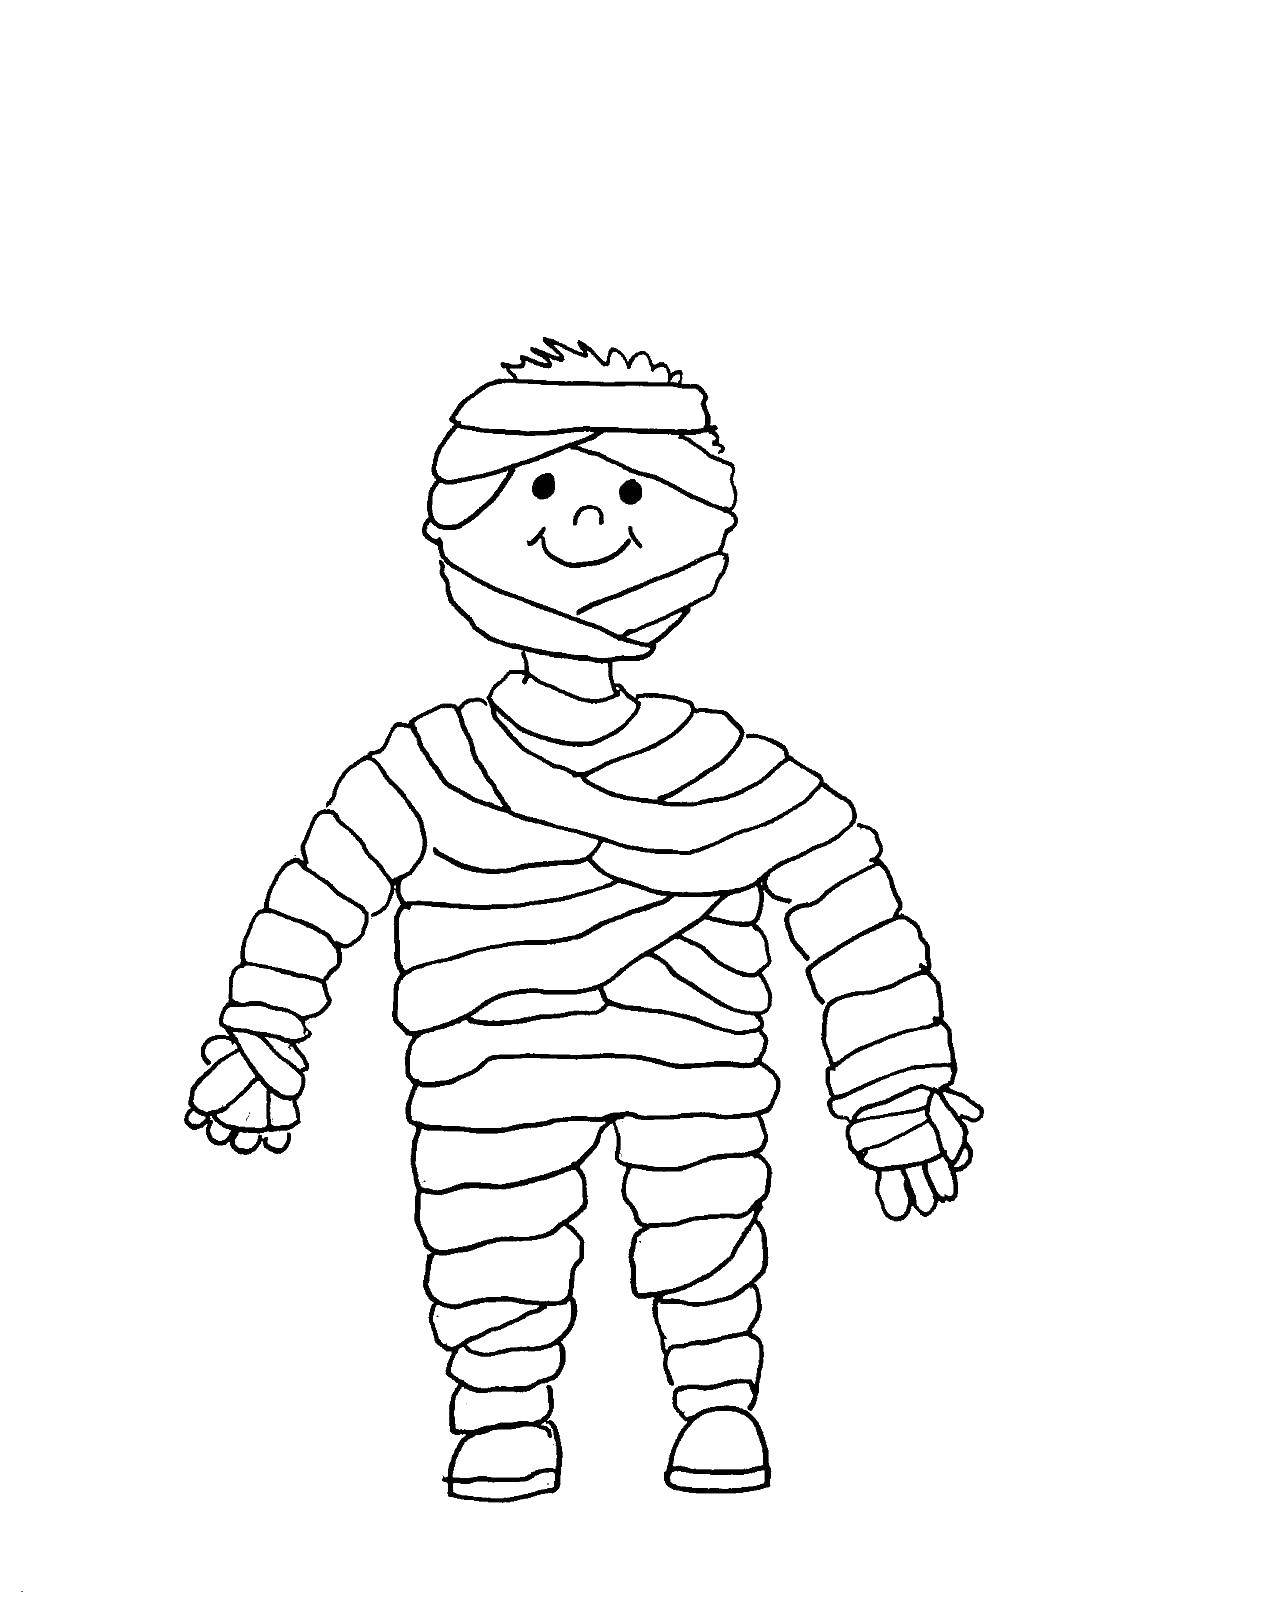 Coloring Mummy costume. Category The mummy. Tags:  The mummy.